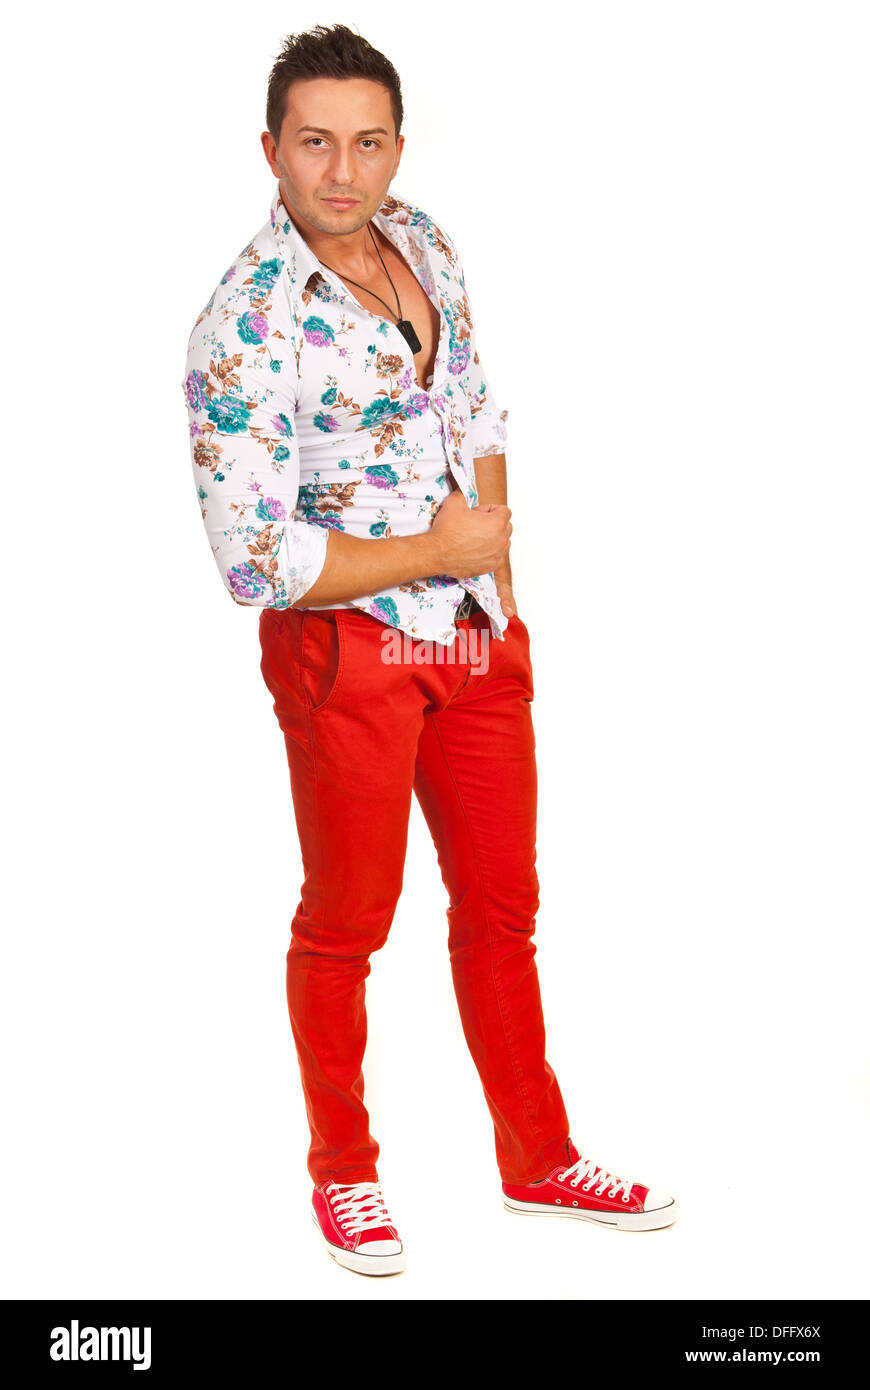 Model man posing in floral shirt and red pants isolated on white background  Stock Photo - Alamy